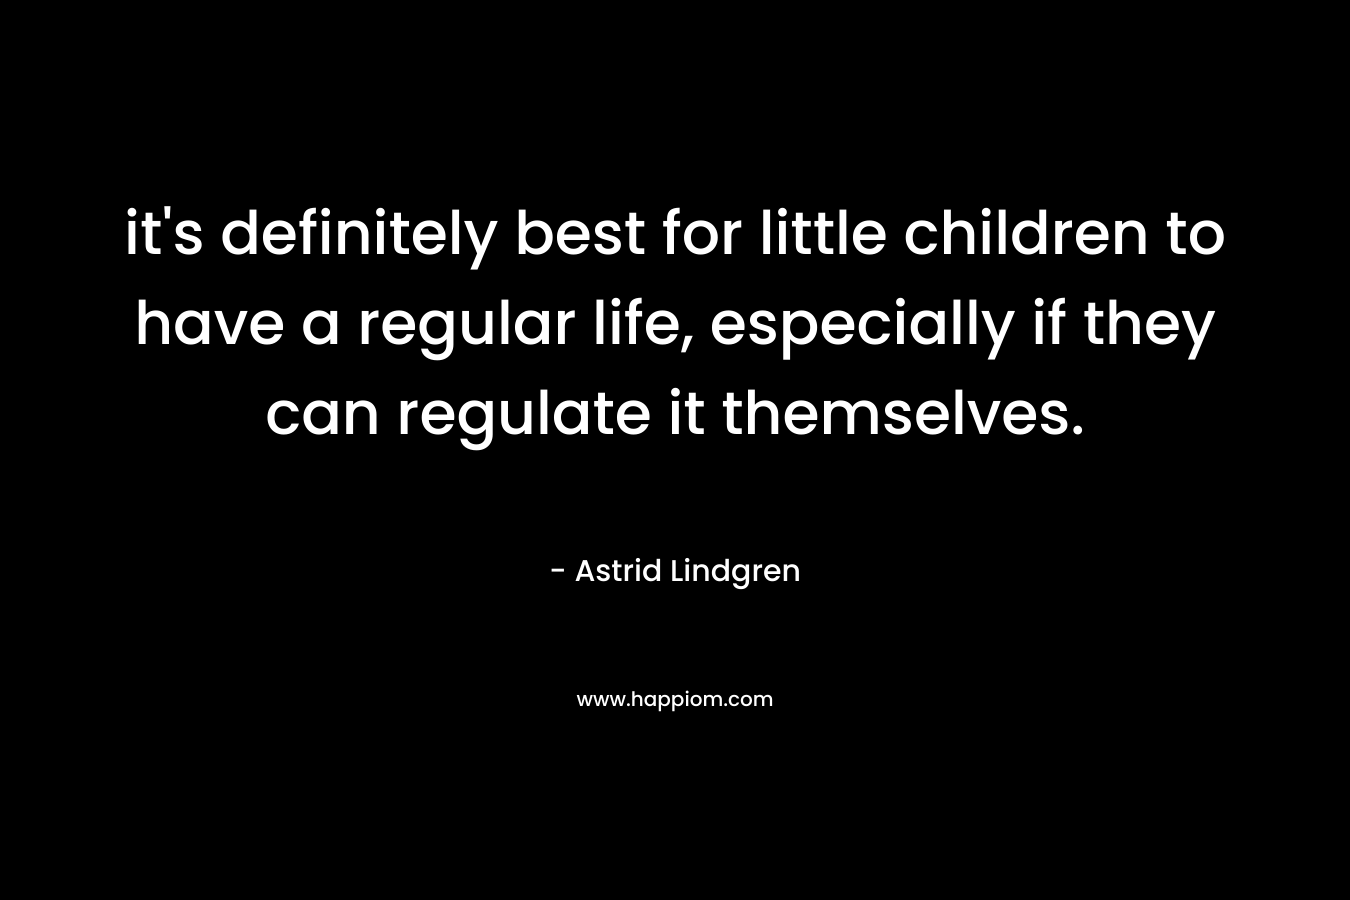 it’s definitely best for little children to have a regular life, especially if they can regulate it themselves. – Astrid Lindgren